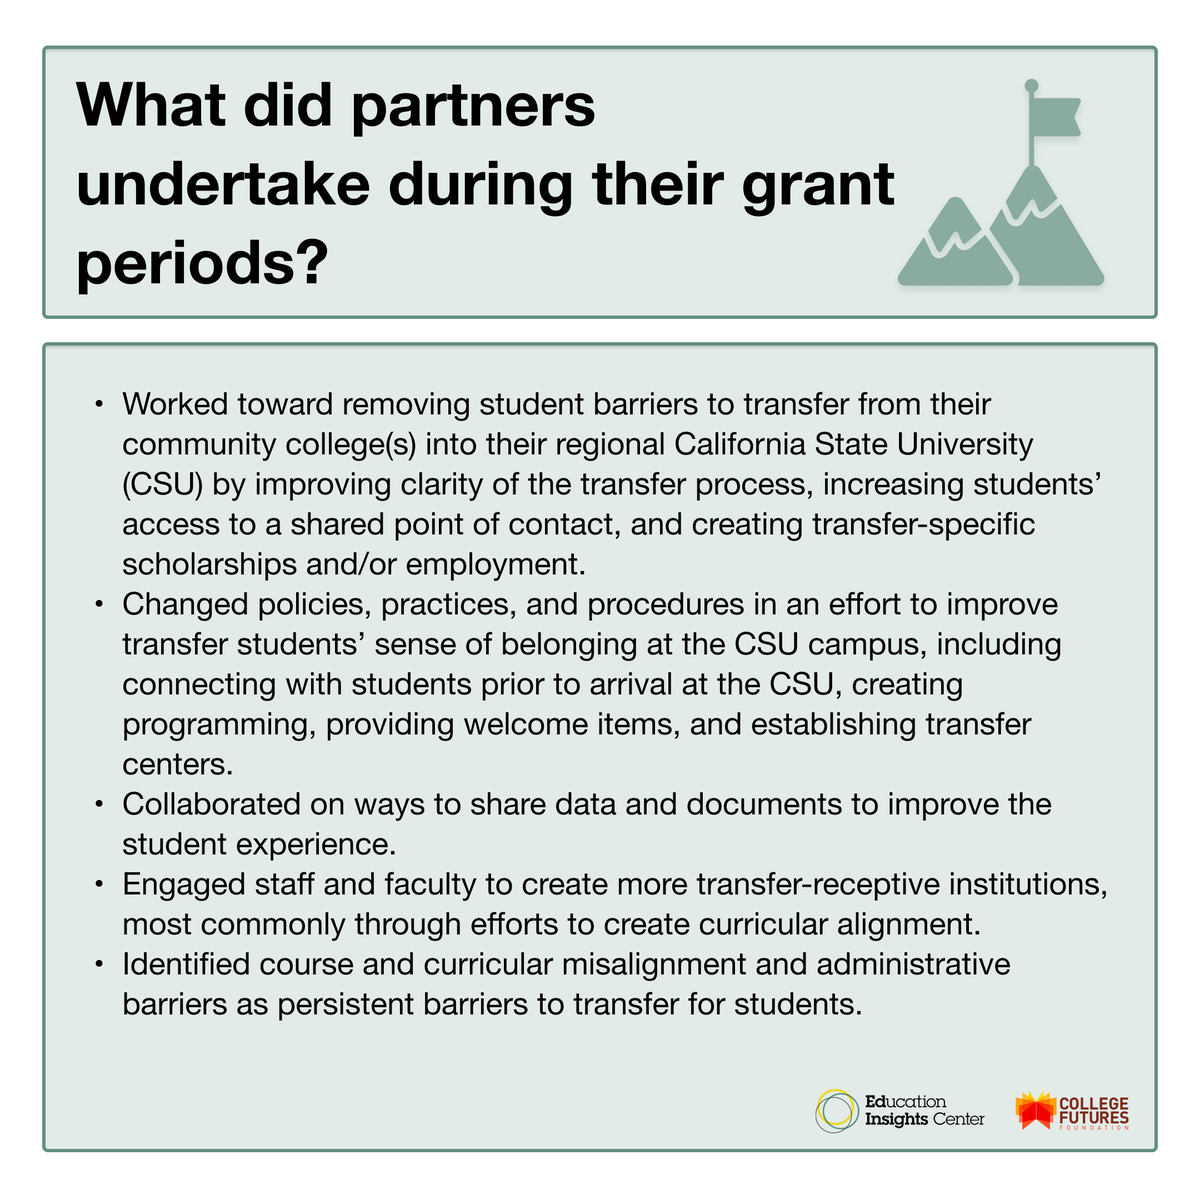 Our latest report shares outcomes from five #collegetransfer partnerships during their @CollegeFutures grant period. In the 'Findings Across Partnerships' section, we report, by research question, the themes that arose across most partnerships. Read here: edinsightscenter.org/collegetransfe…